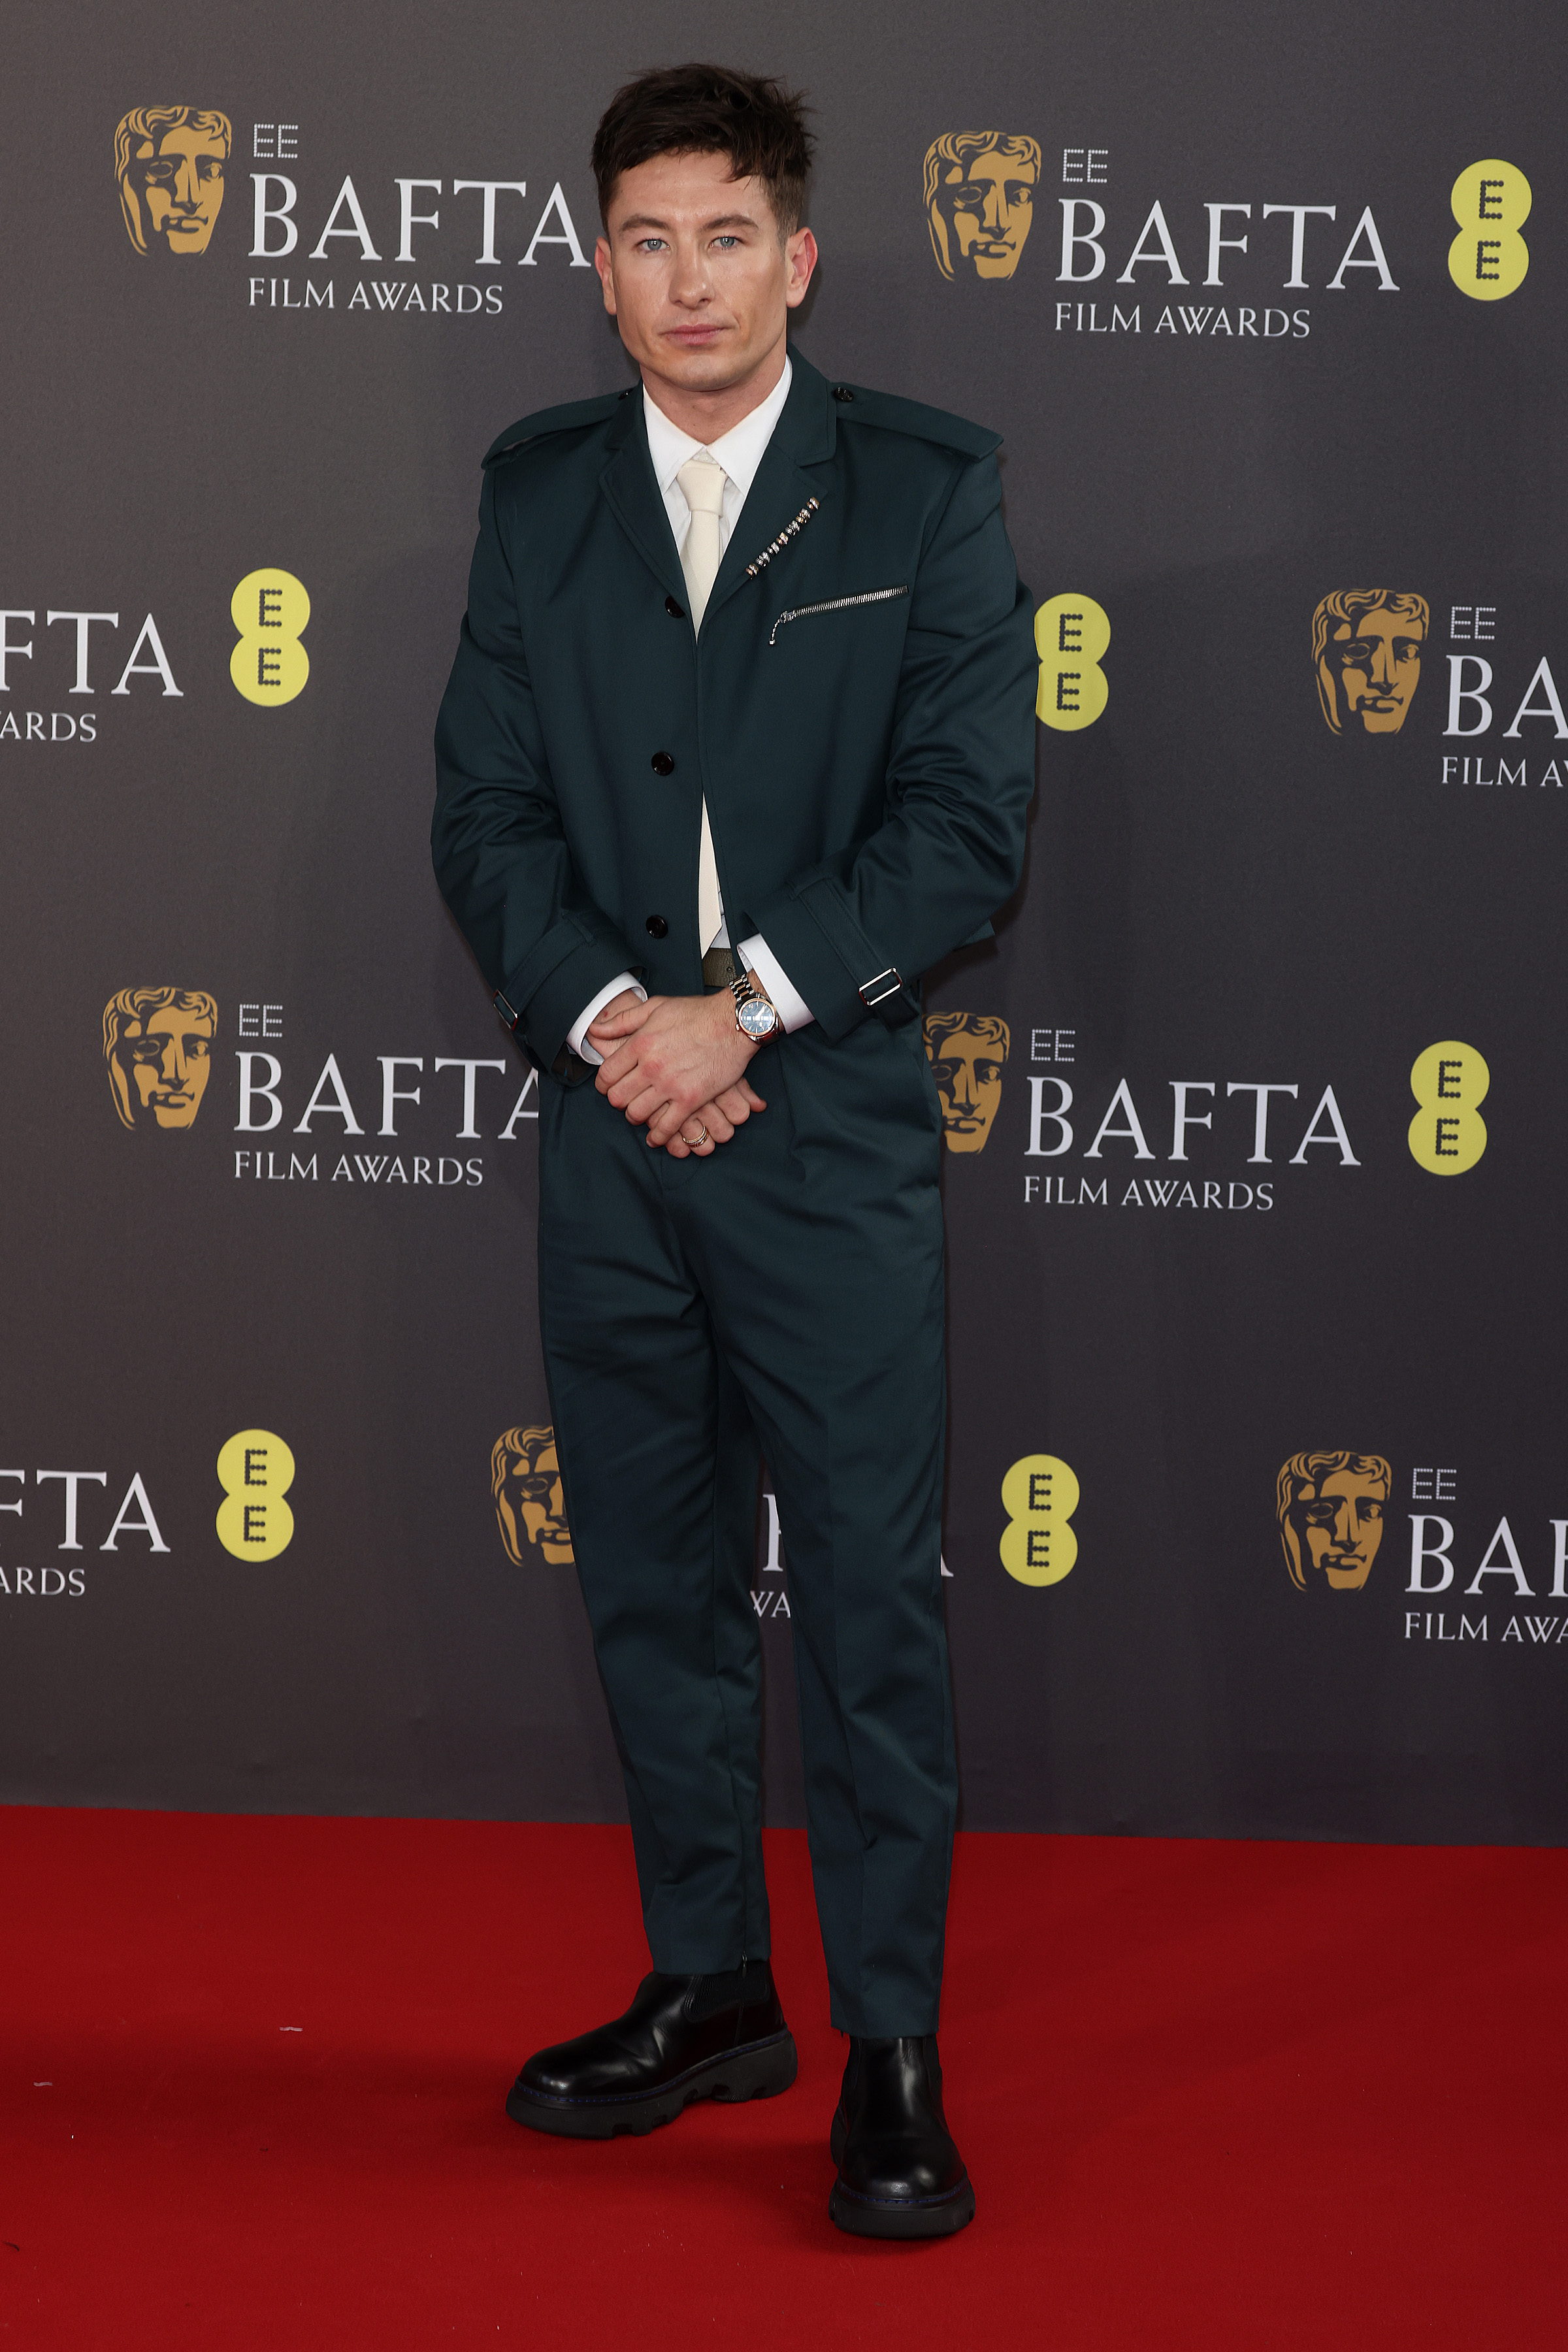 Actor Barry Keoghan in a very dark green suit on the red carpet